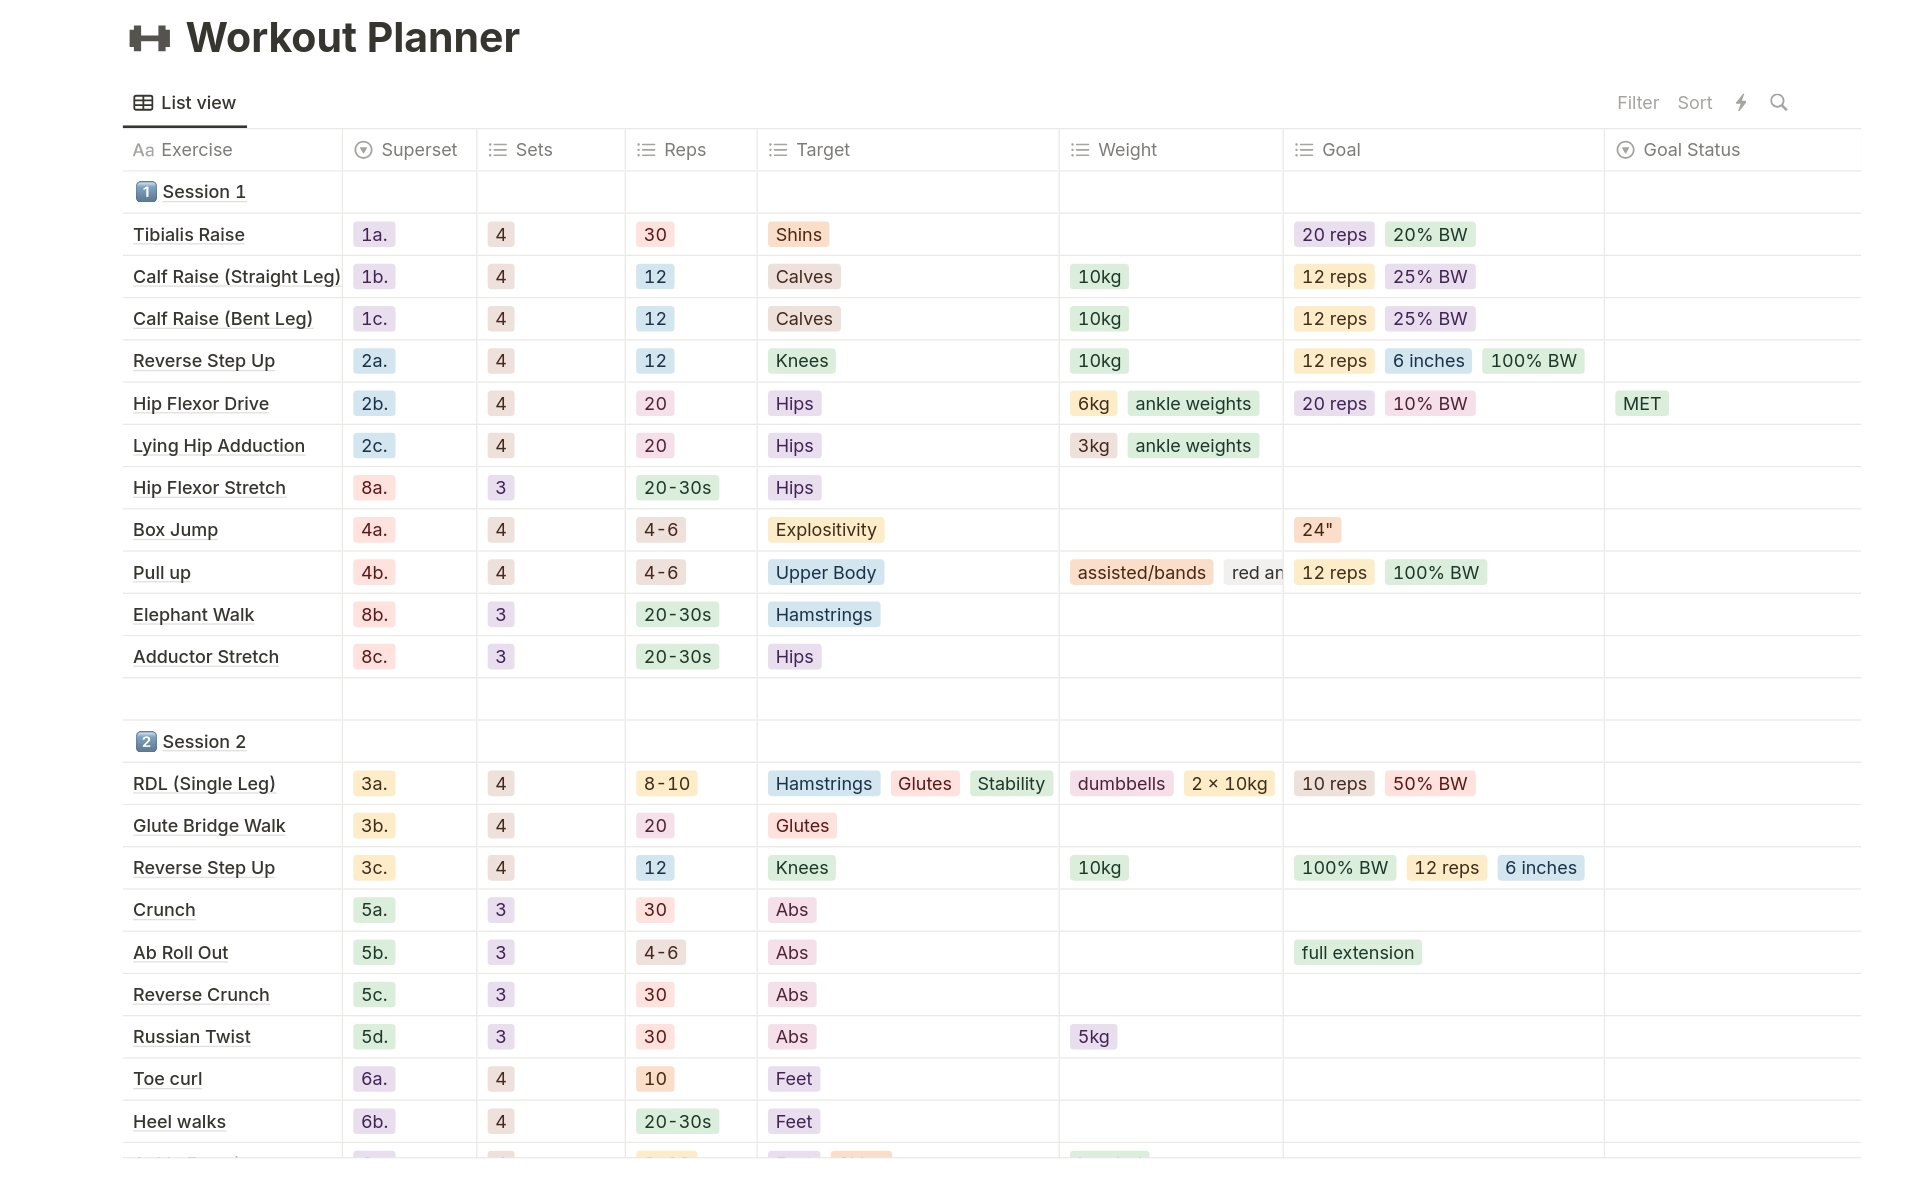 Plan your best workouts with this all-in-one planner.

Keep track of your sessions by detailing your sessions, targets and progress, and keep on track with your goals with your progress tracker.

It's time to level up your workout game!